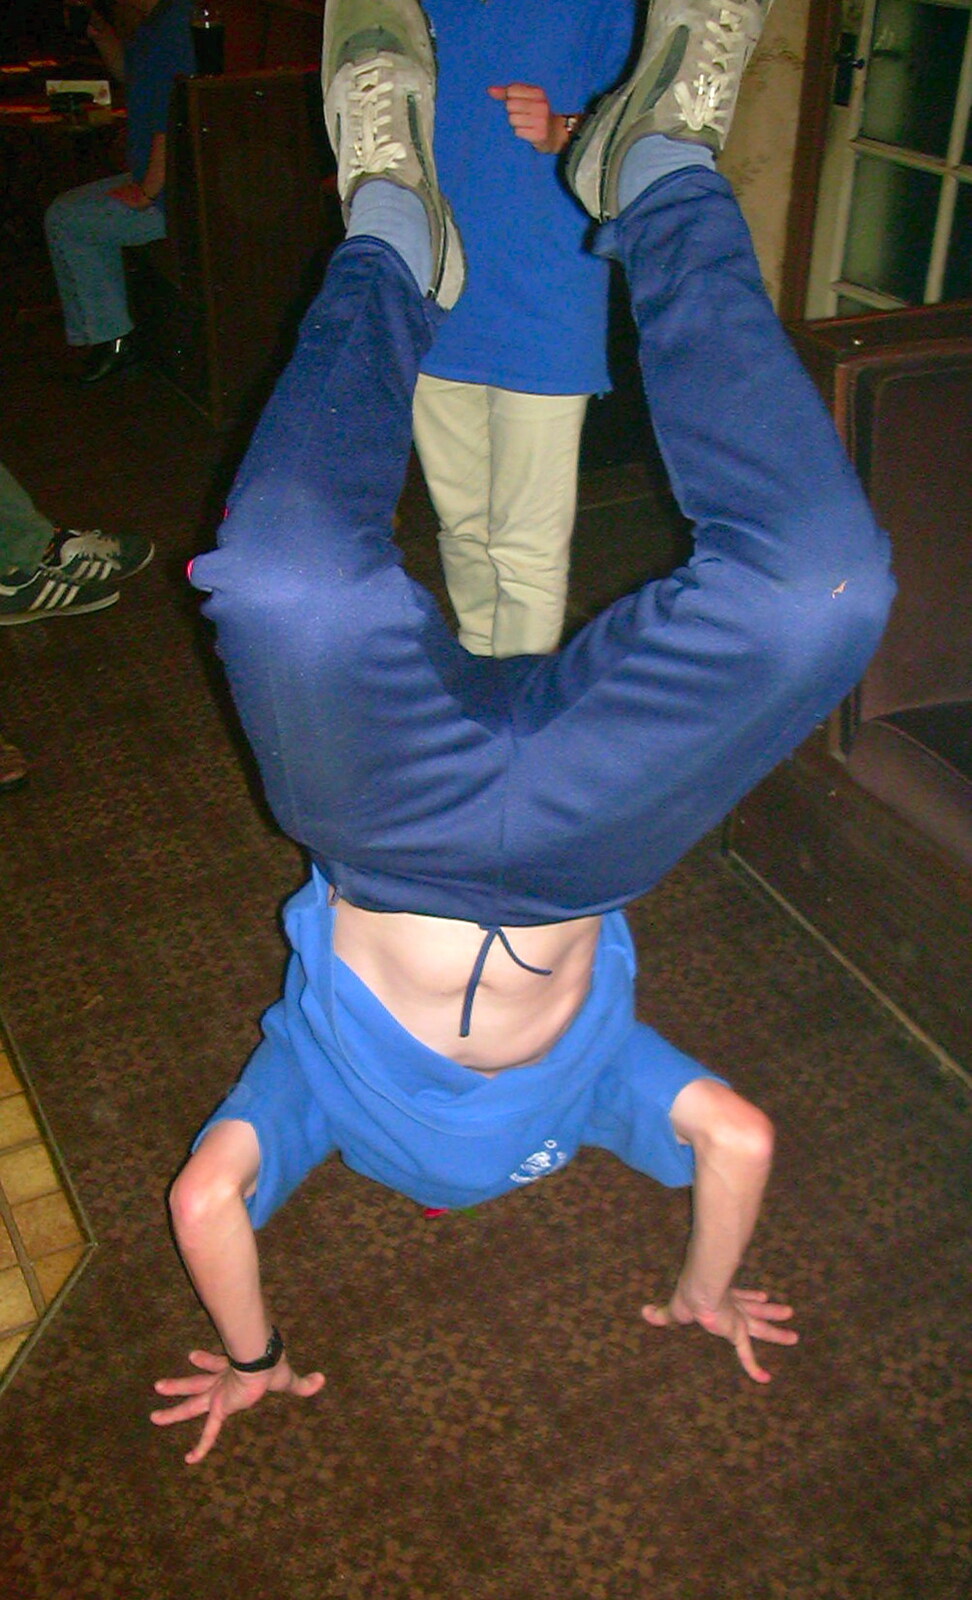 A BSCC Presentation, Brome Swan, Suffolk - 9th November 2002: Someone does a head-stand